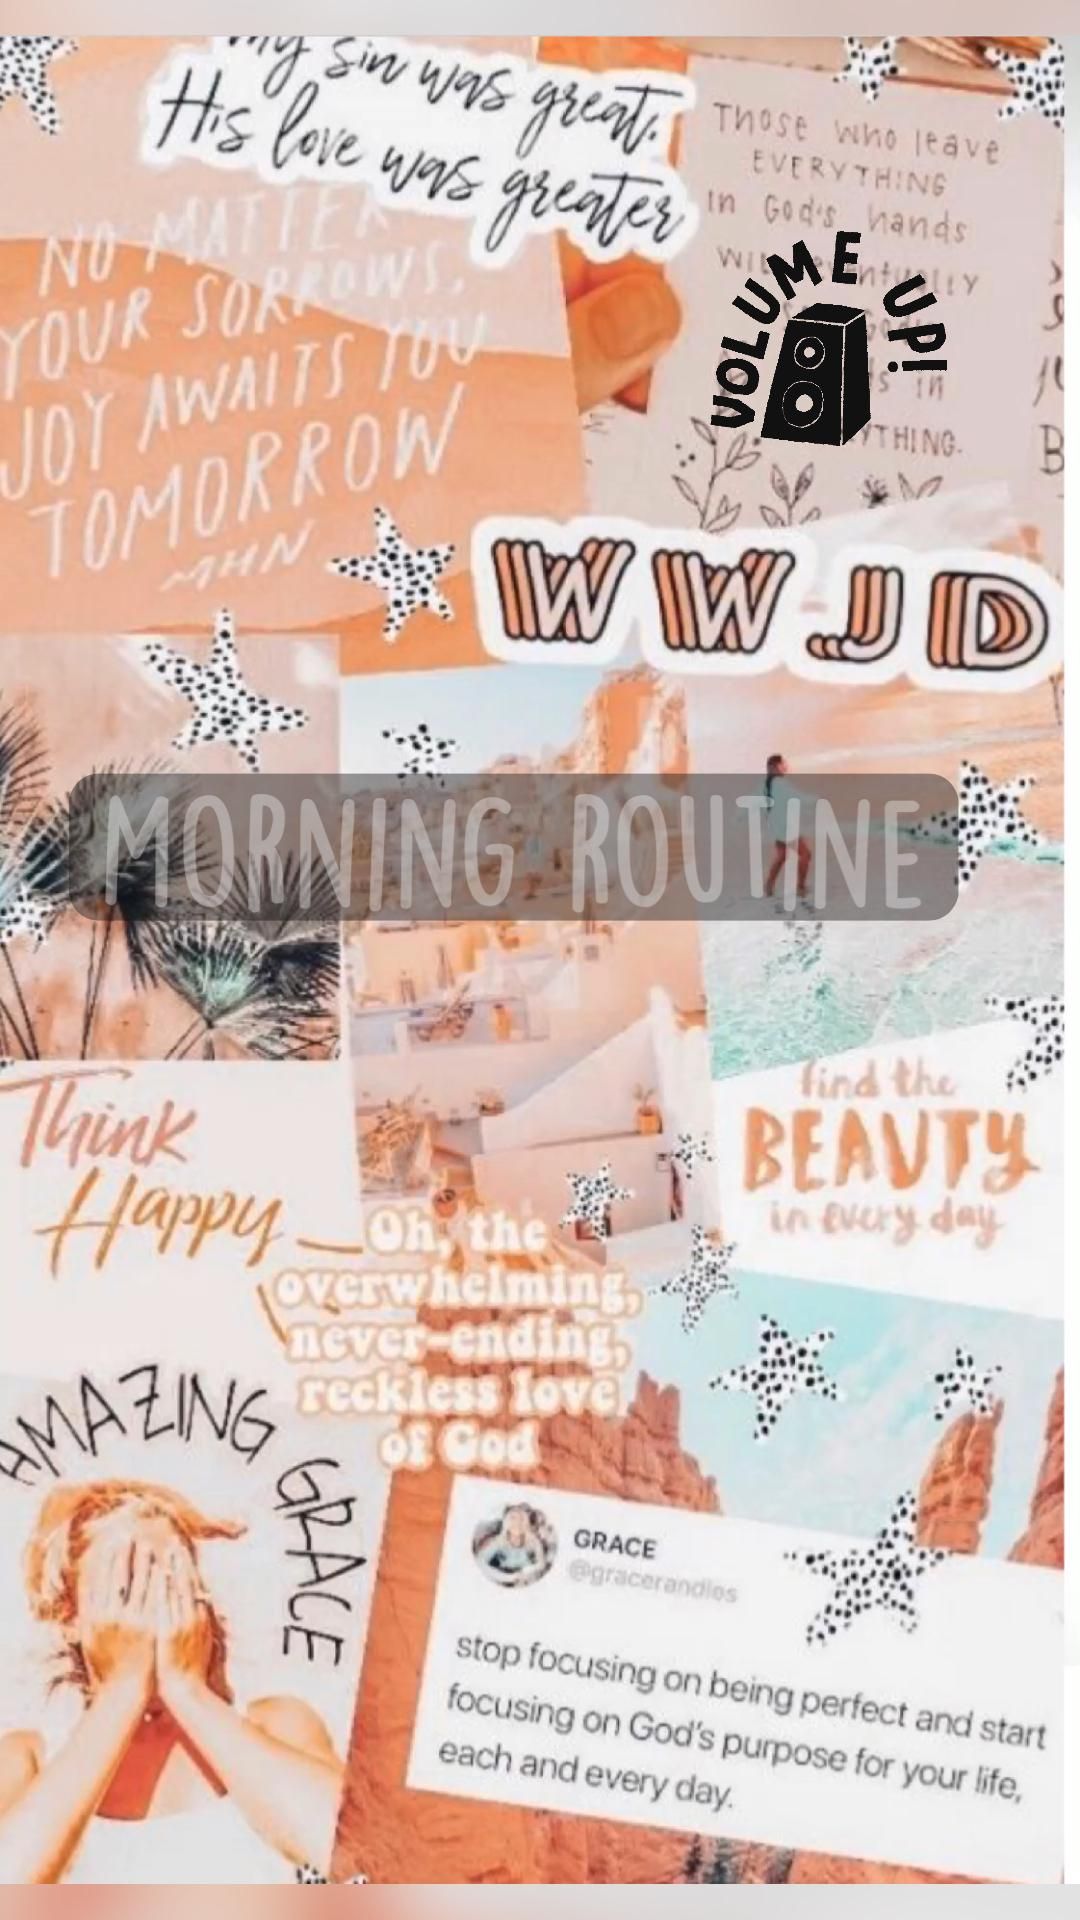 daily routine wallpaper – DRMERS CLUB